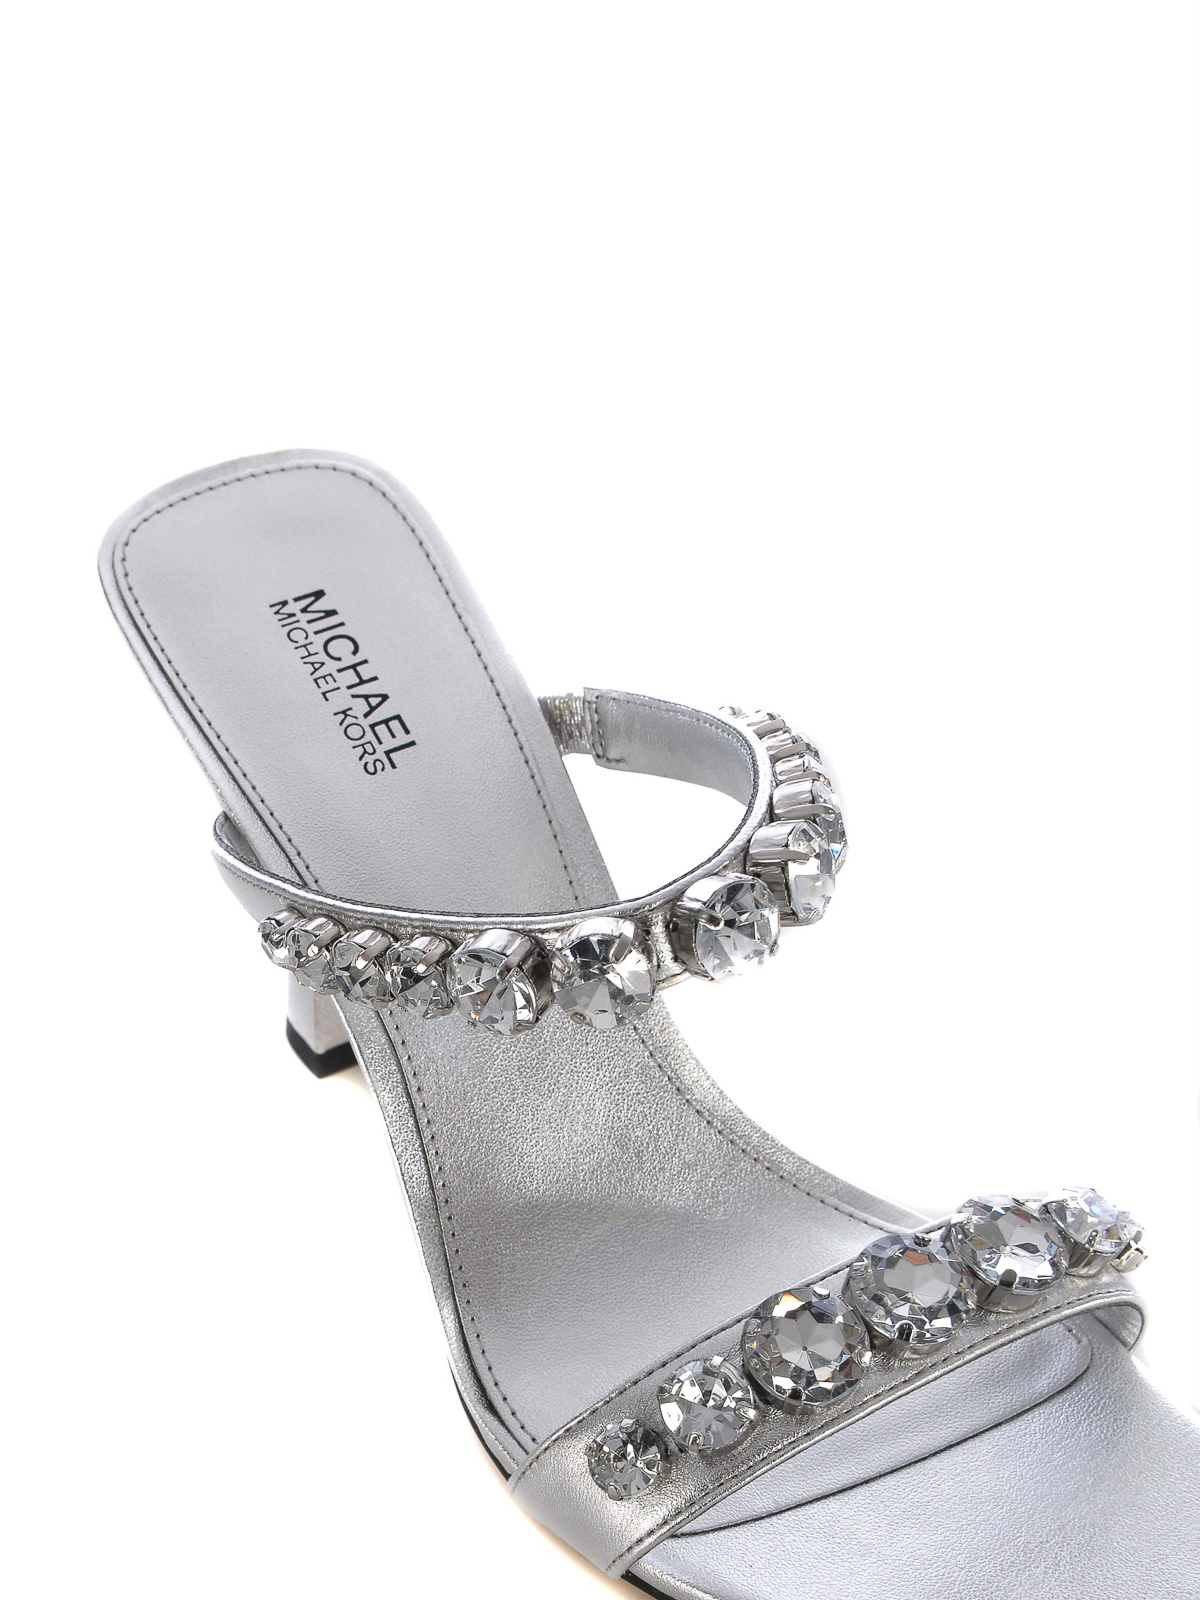 Shop Michael Kors Sandal   In Leather In Silver